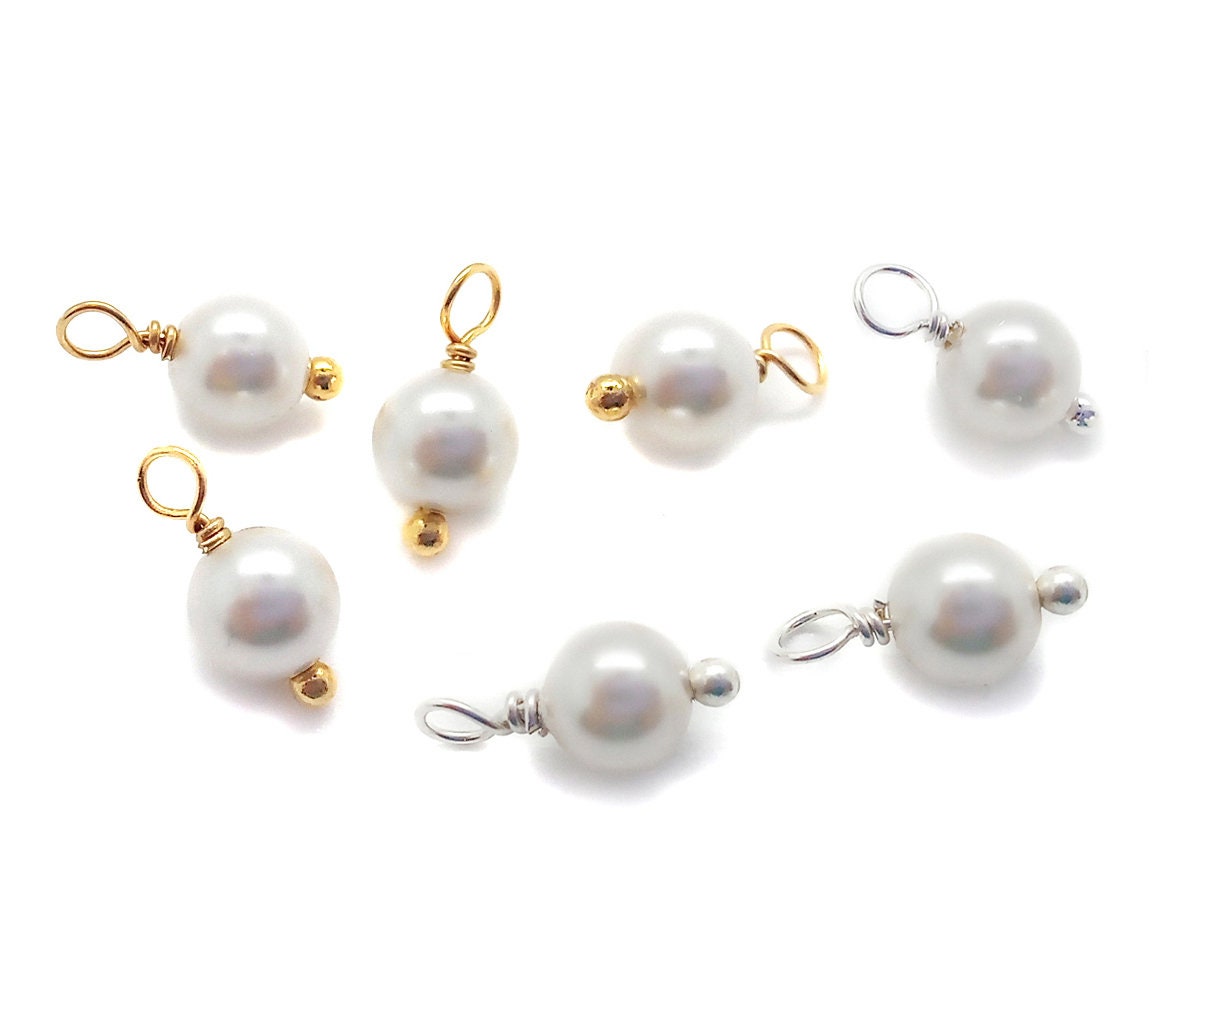 Loreal Beads Pearl Charms Naari Beads for Jewelry Making 3MM 1300 Pieces 